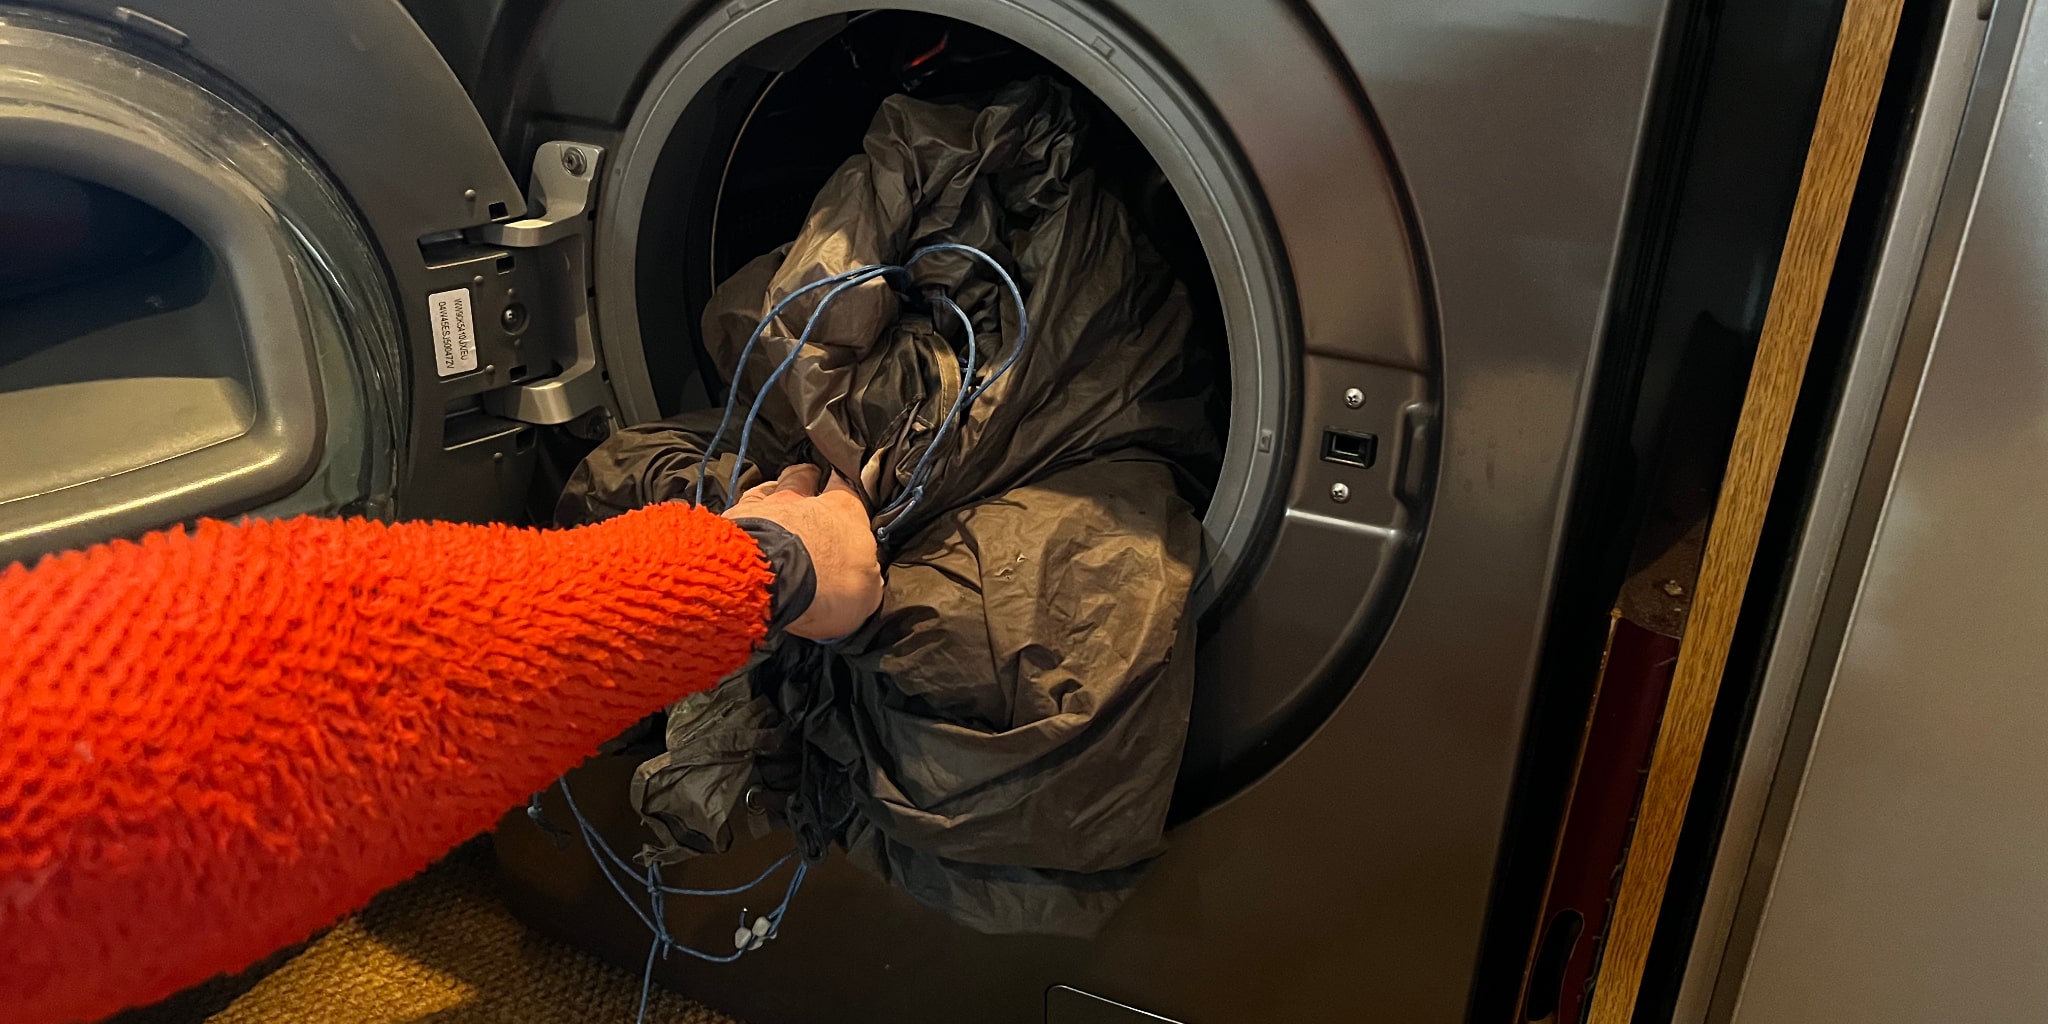 How To Wash A Tent In The Washing Machine